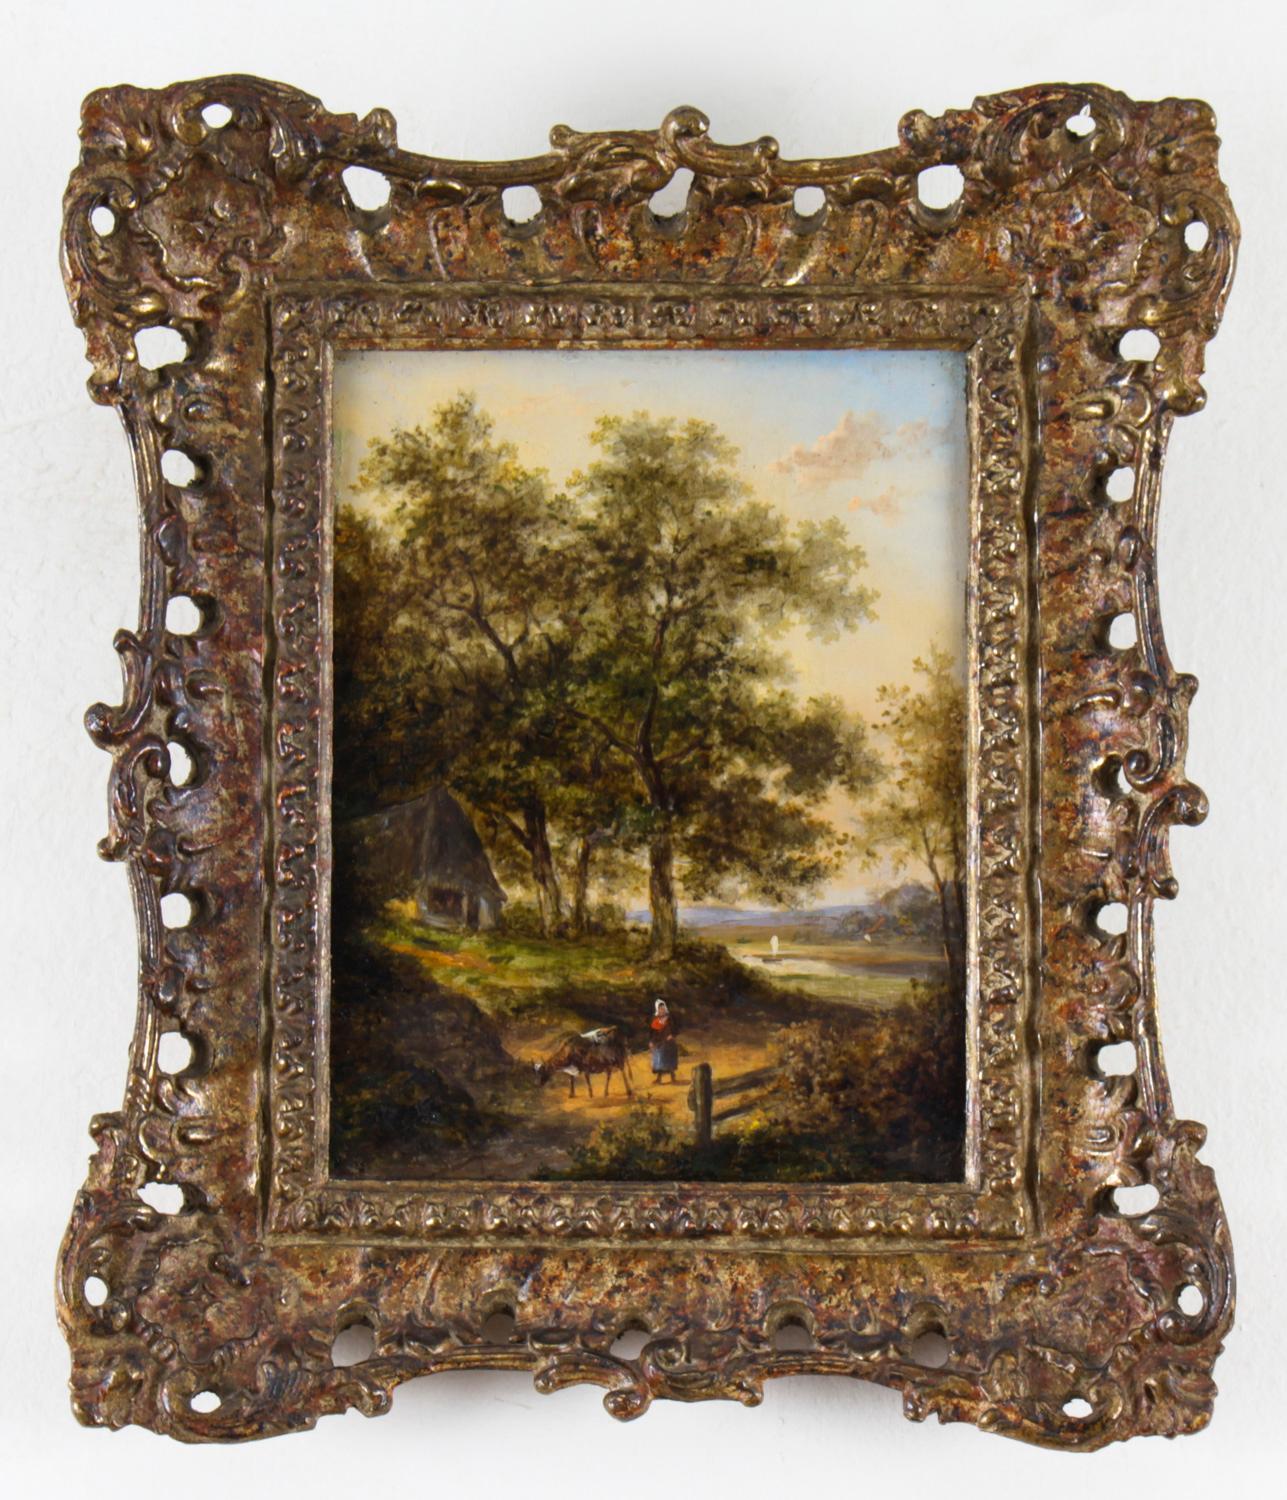 A lovely pair of Dutch oil on panel framed paintings by Jan Evert Morel, (1777-1808), both signed lower left and late 18th Century in date.
The paintings delightfully present charming forest scenes with figures in period costumes.

The artist